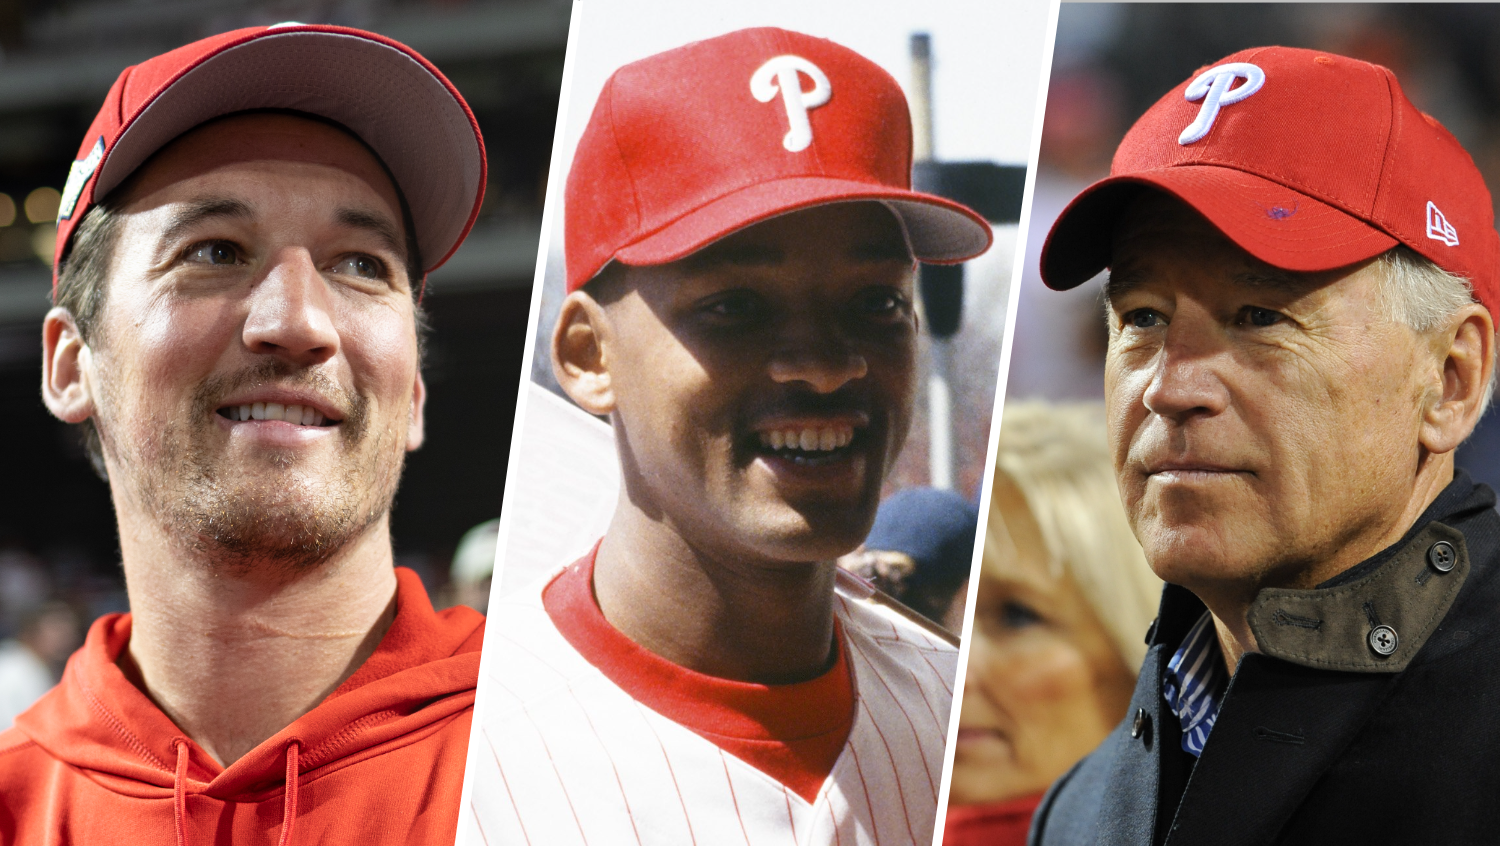 From a president to a ‘Fresh Prince': Check out some celebrity Phillies ‘phans'